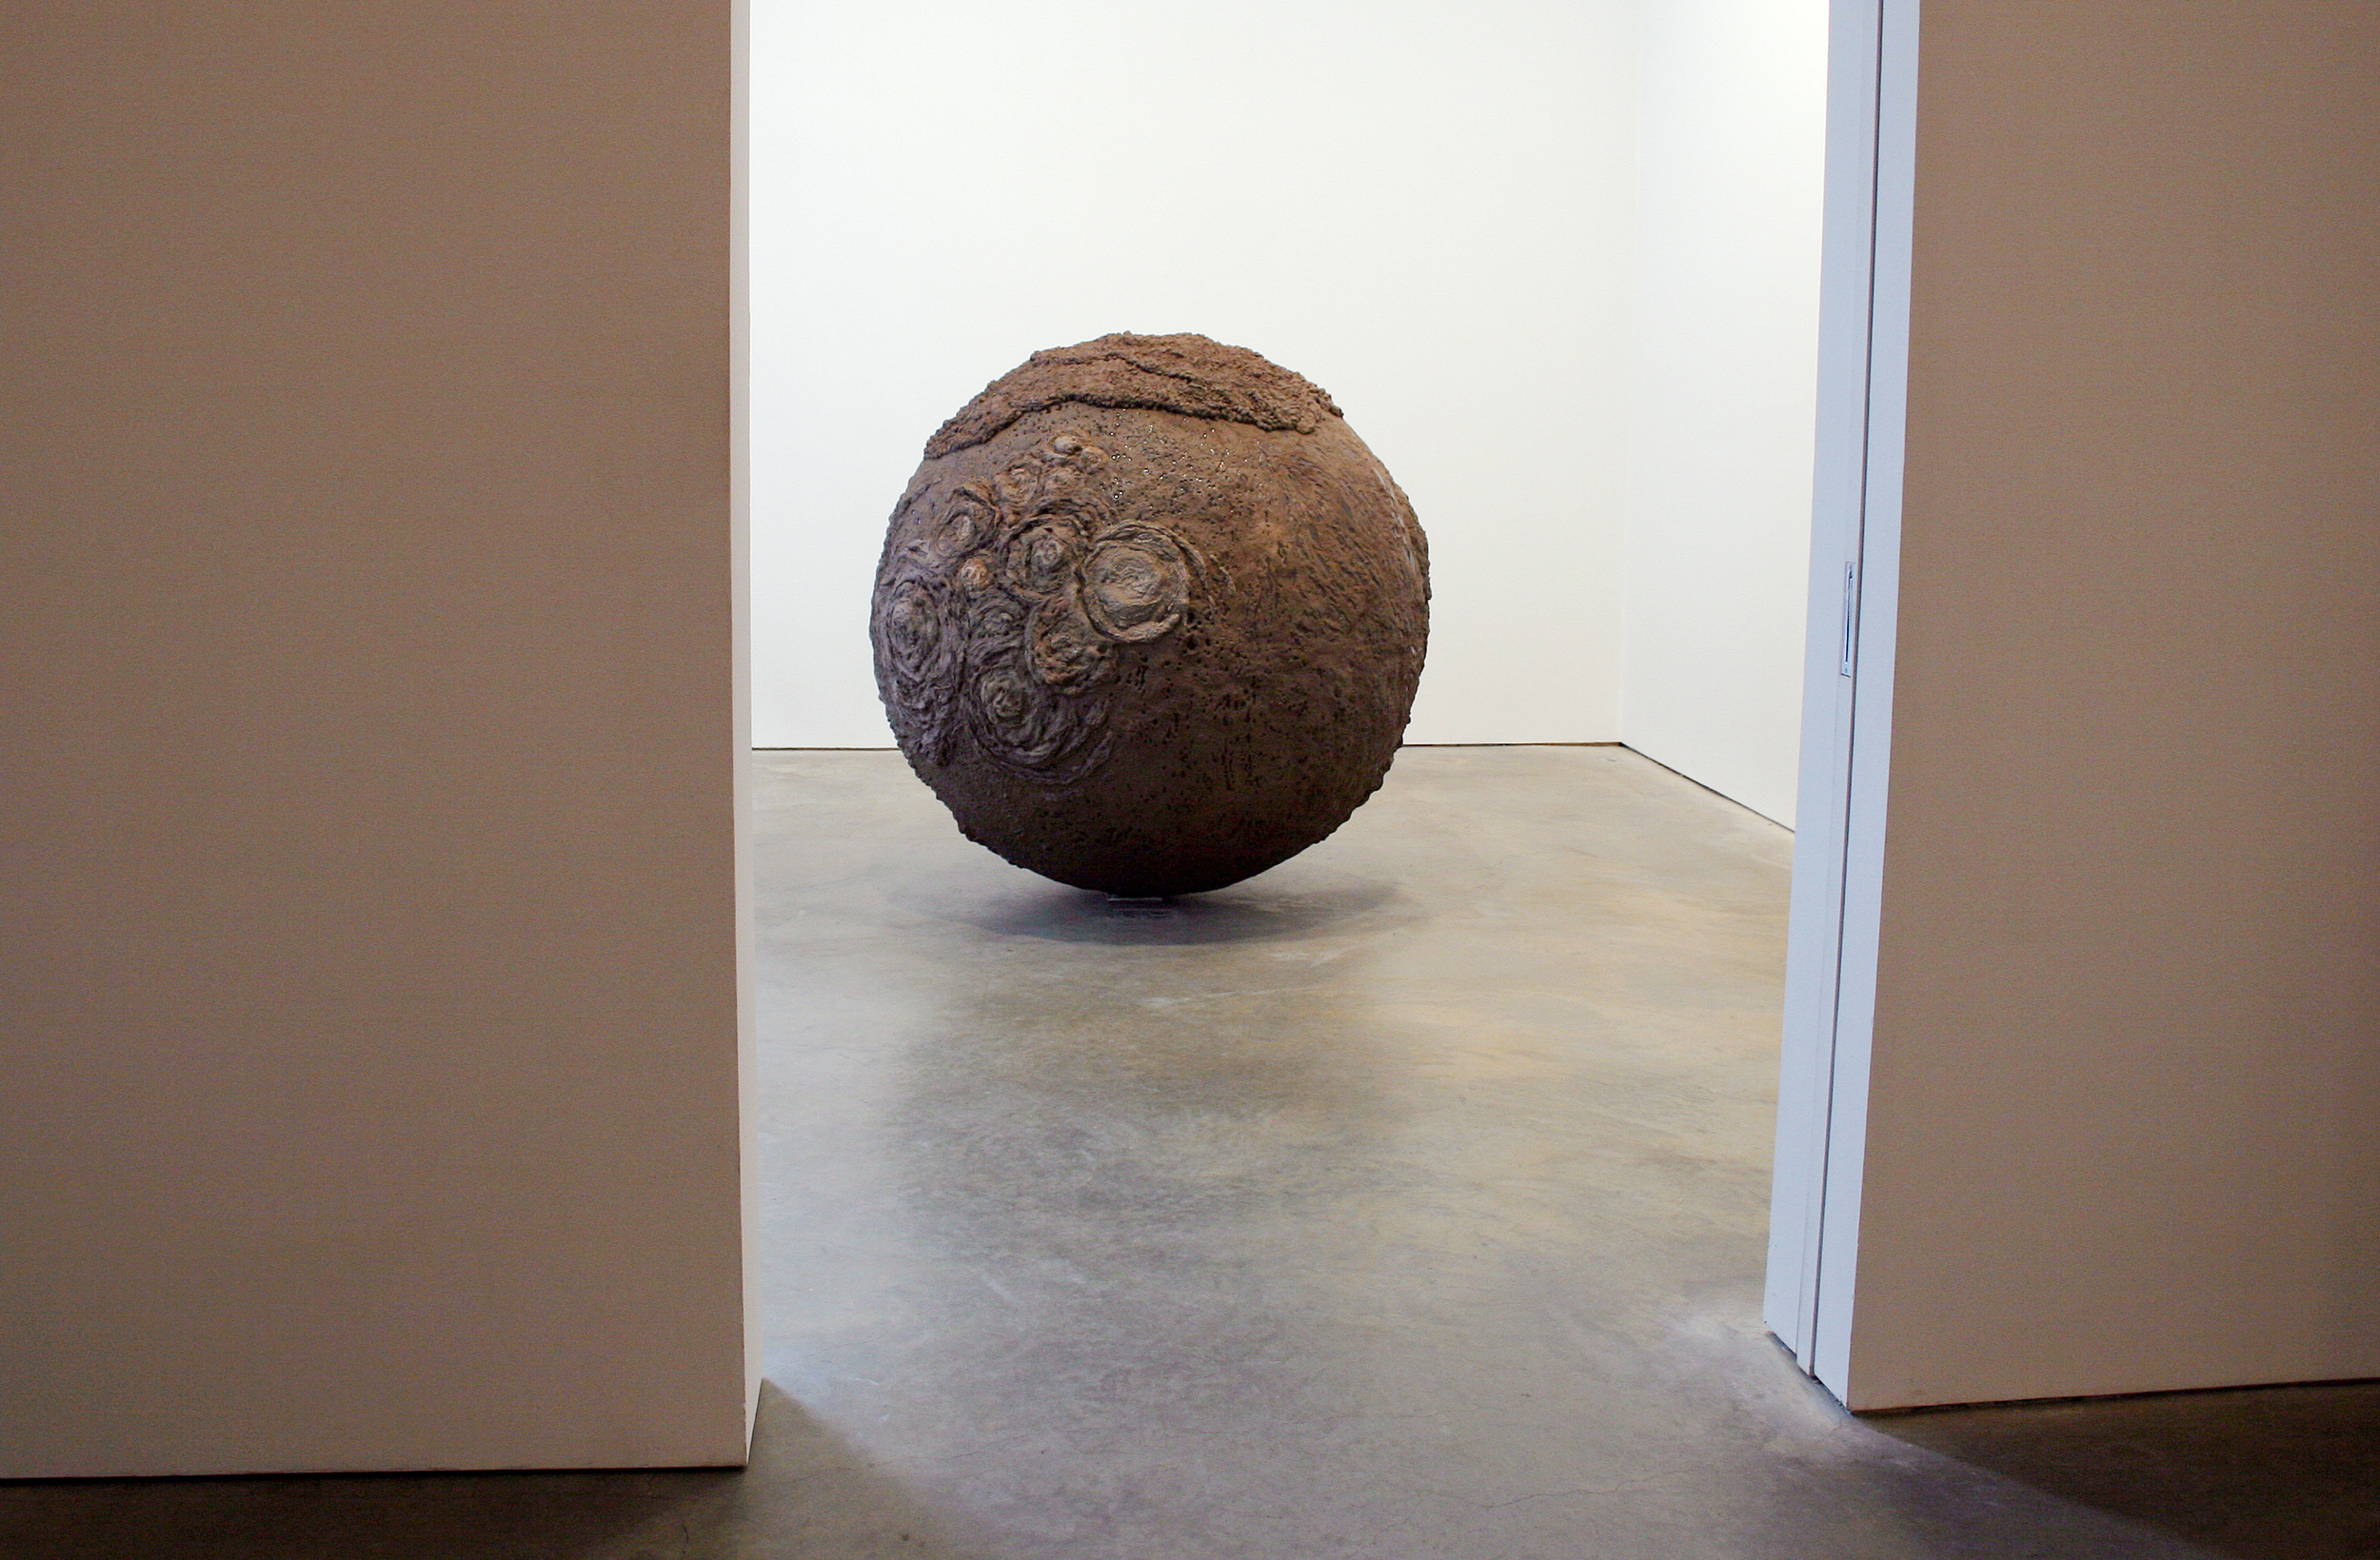  Bad Planet, 2005, Foam, epoxy, lacquer, oil, and stainless steel, 65 x 60 x 60 inches 